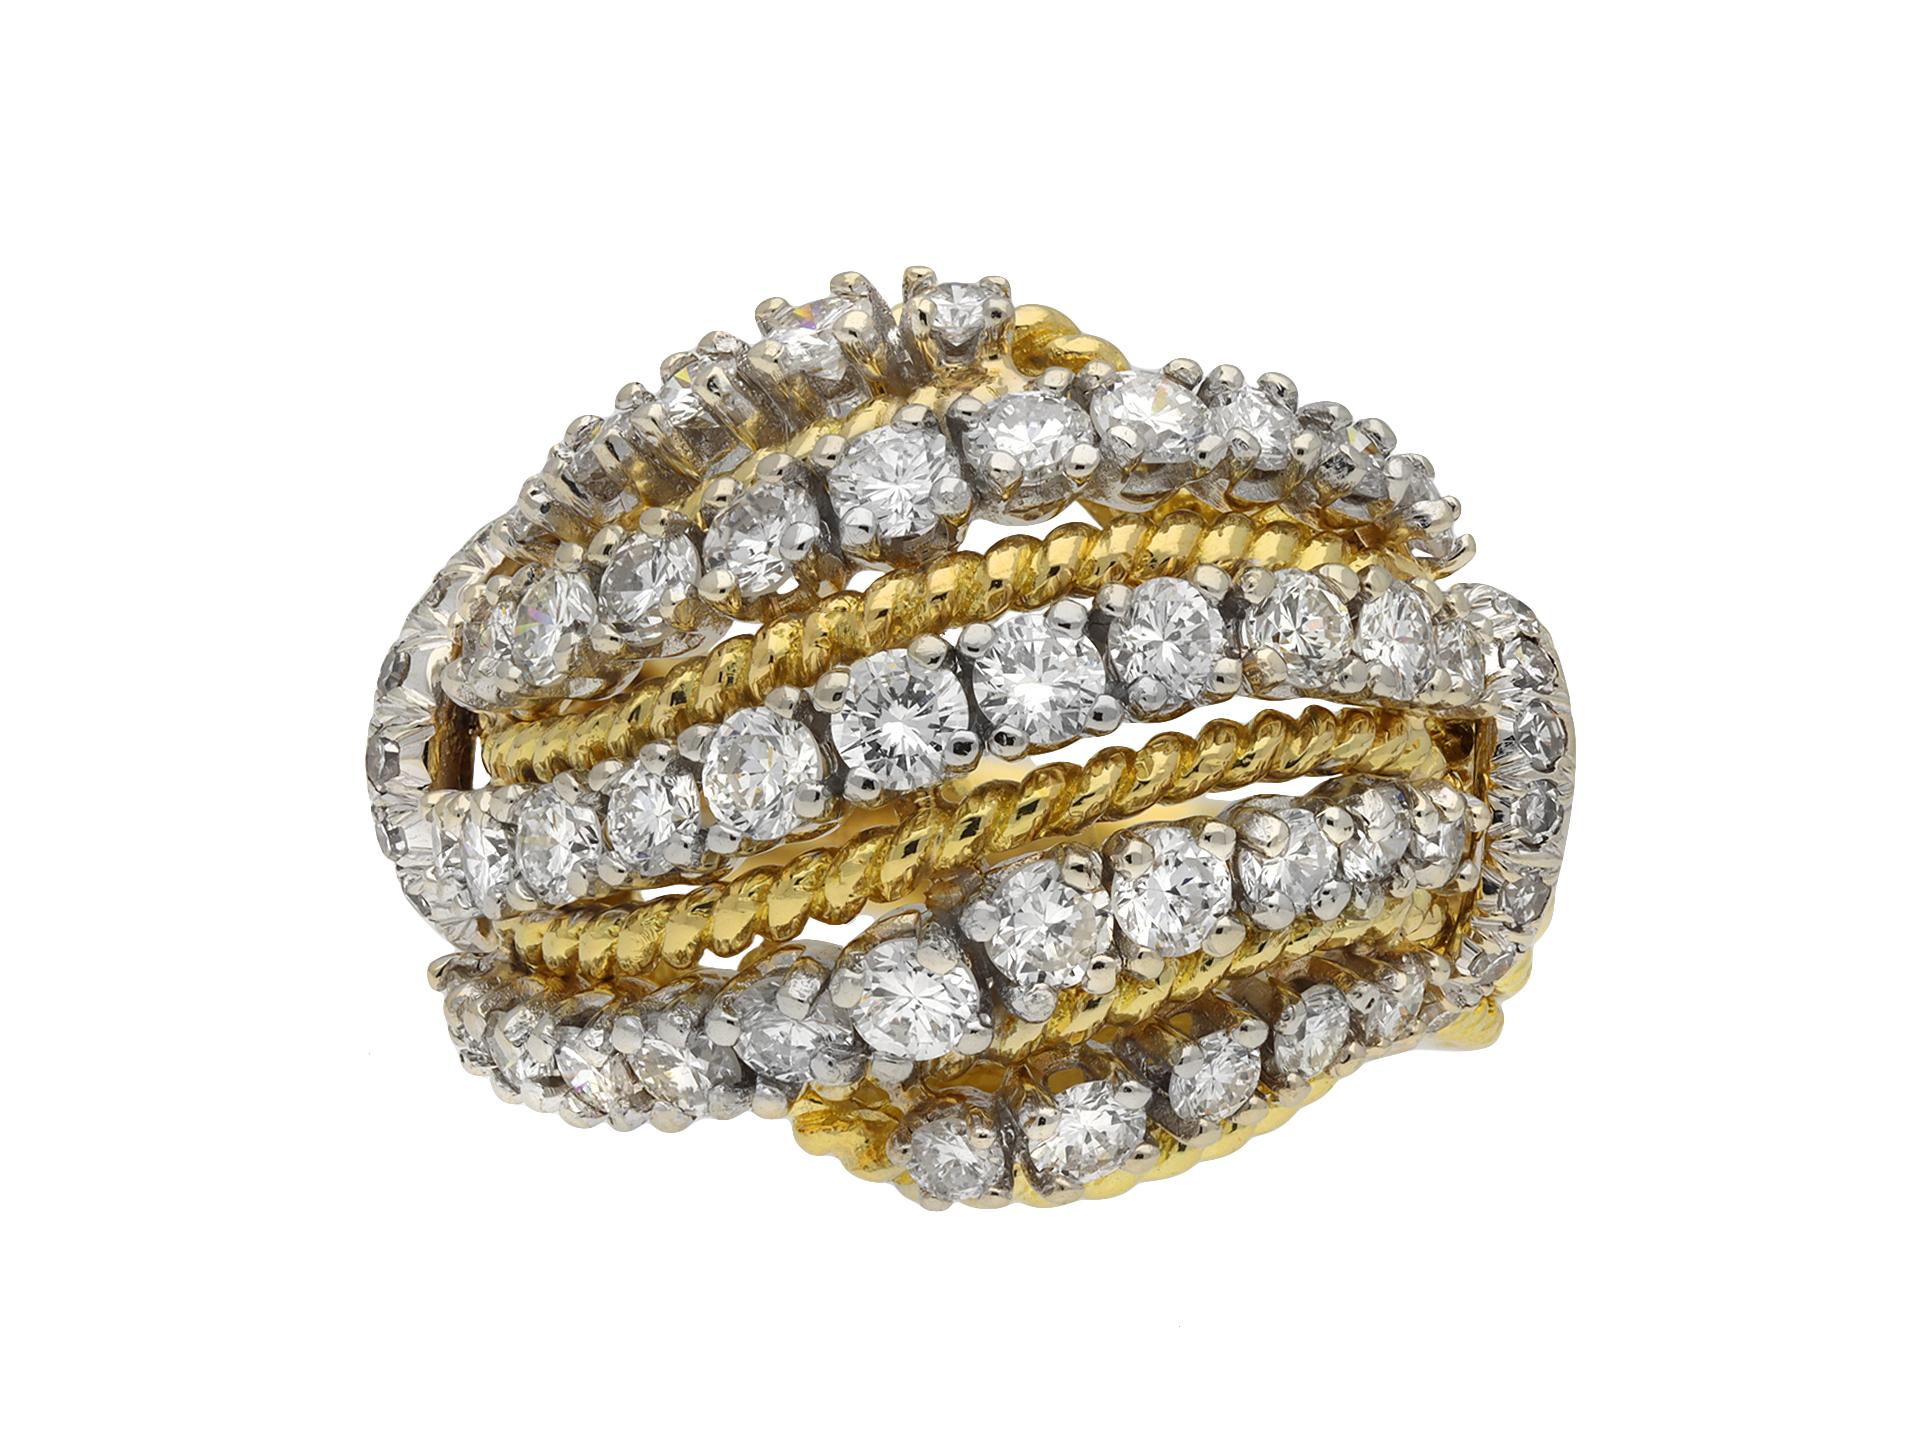 Diamond cocktail ring, by Van Cleef & Arpels circa 1960. A yellow and white gold ring with heavy openwork bombé bezel diagonally set with five single rows of forty three round brilliant cut diamonds in white gold settings with an approximate total